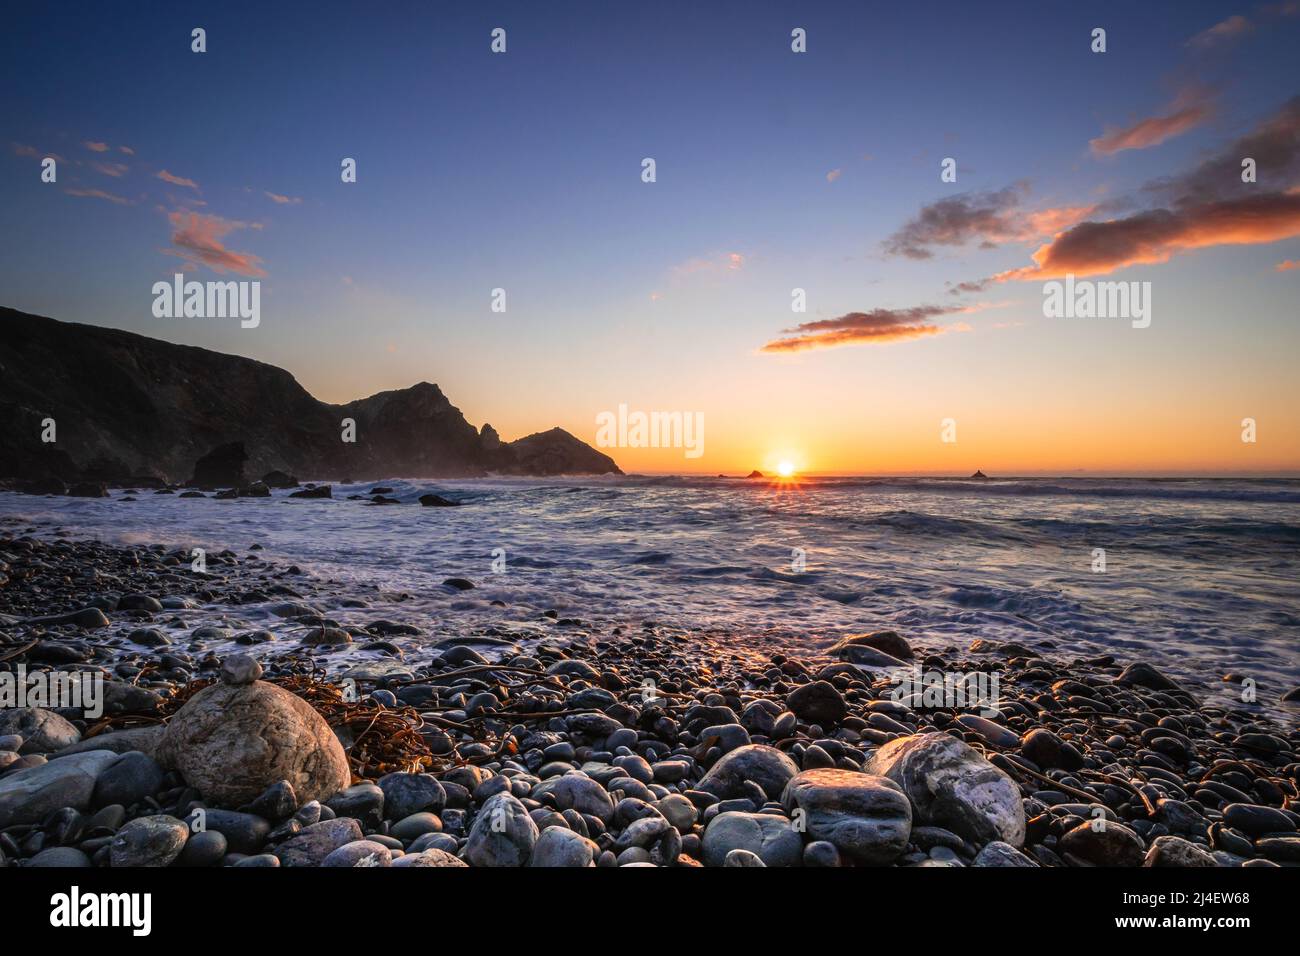 A sunset from Willow Creek beach in Big Sur CA Stock Photo